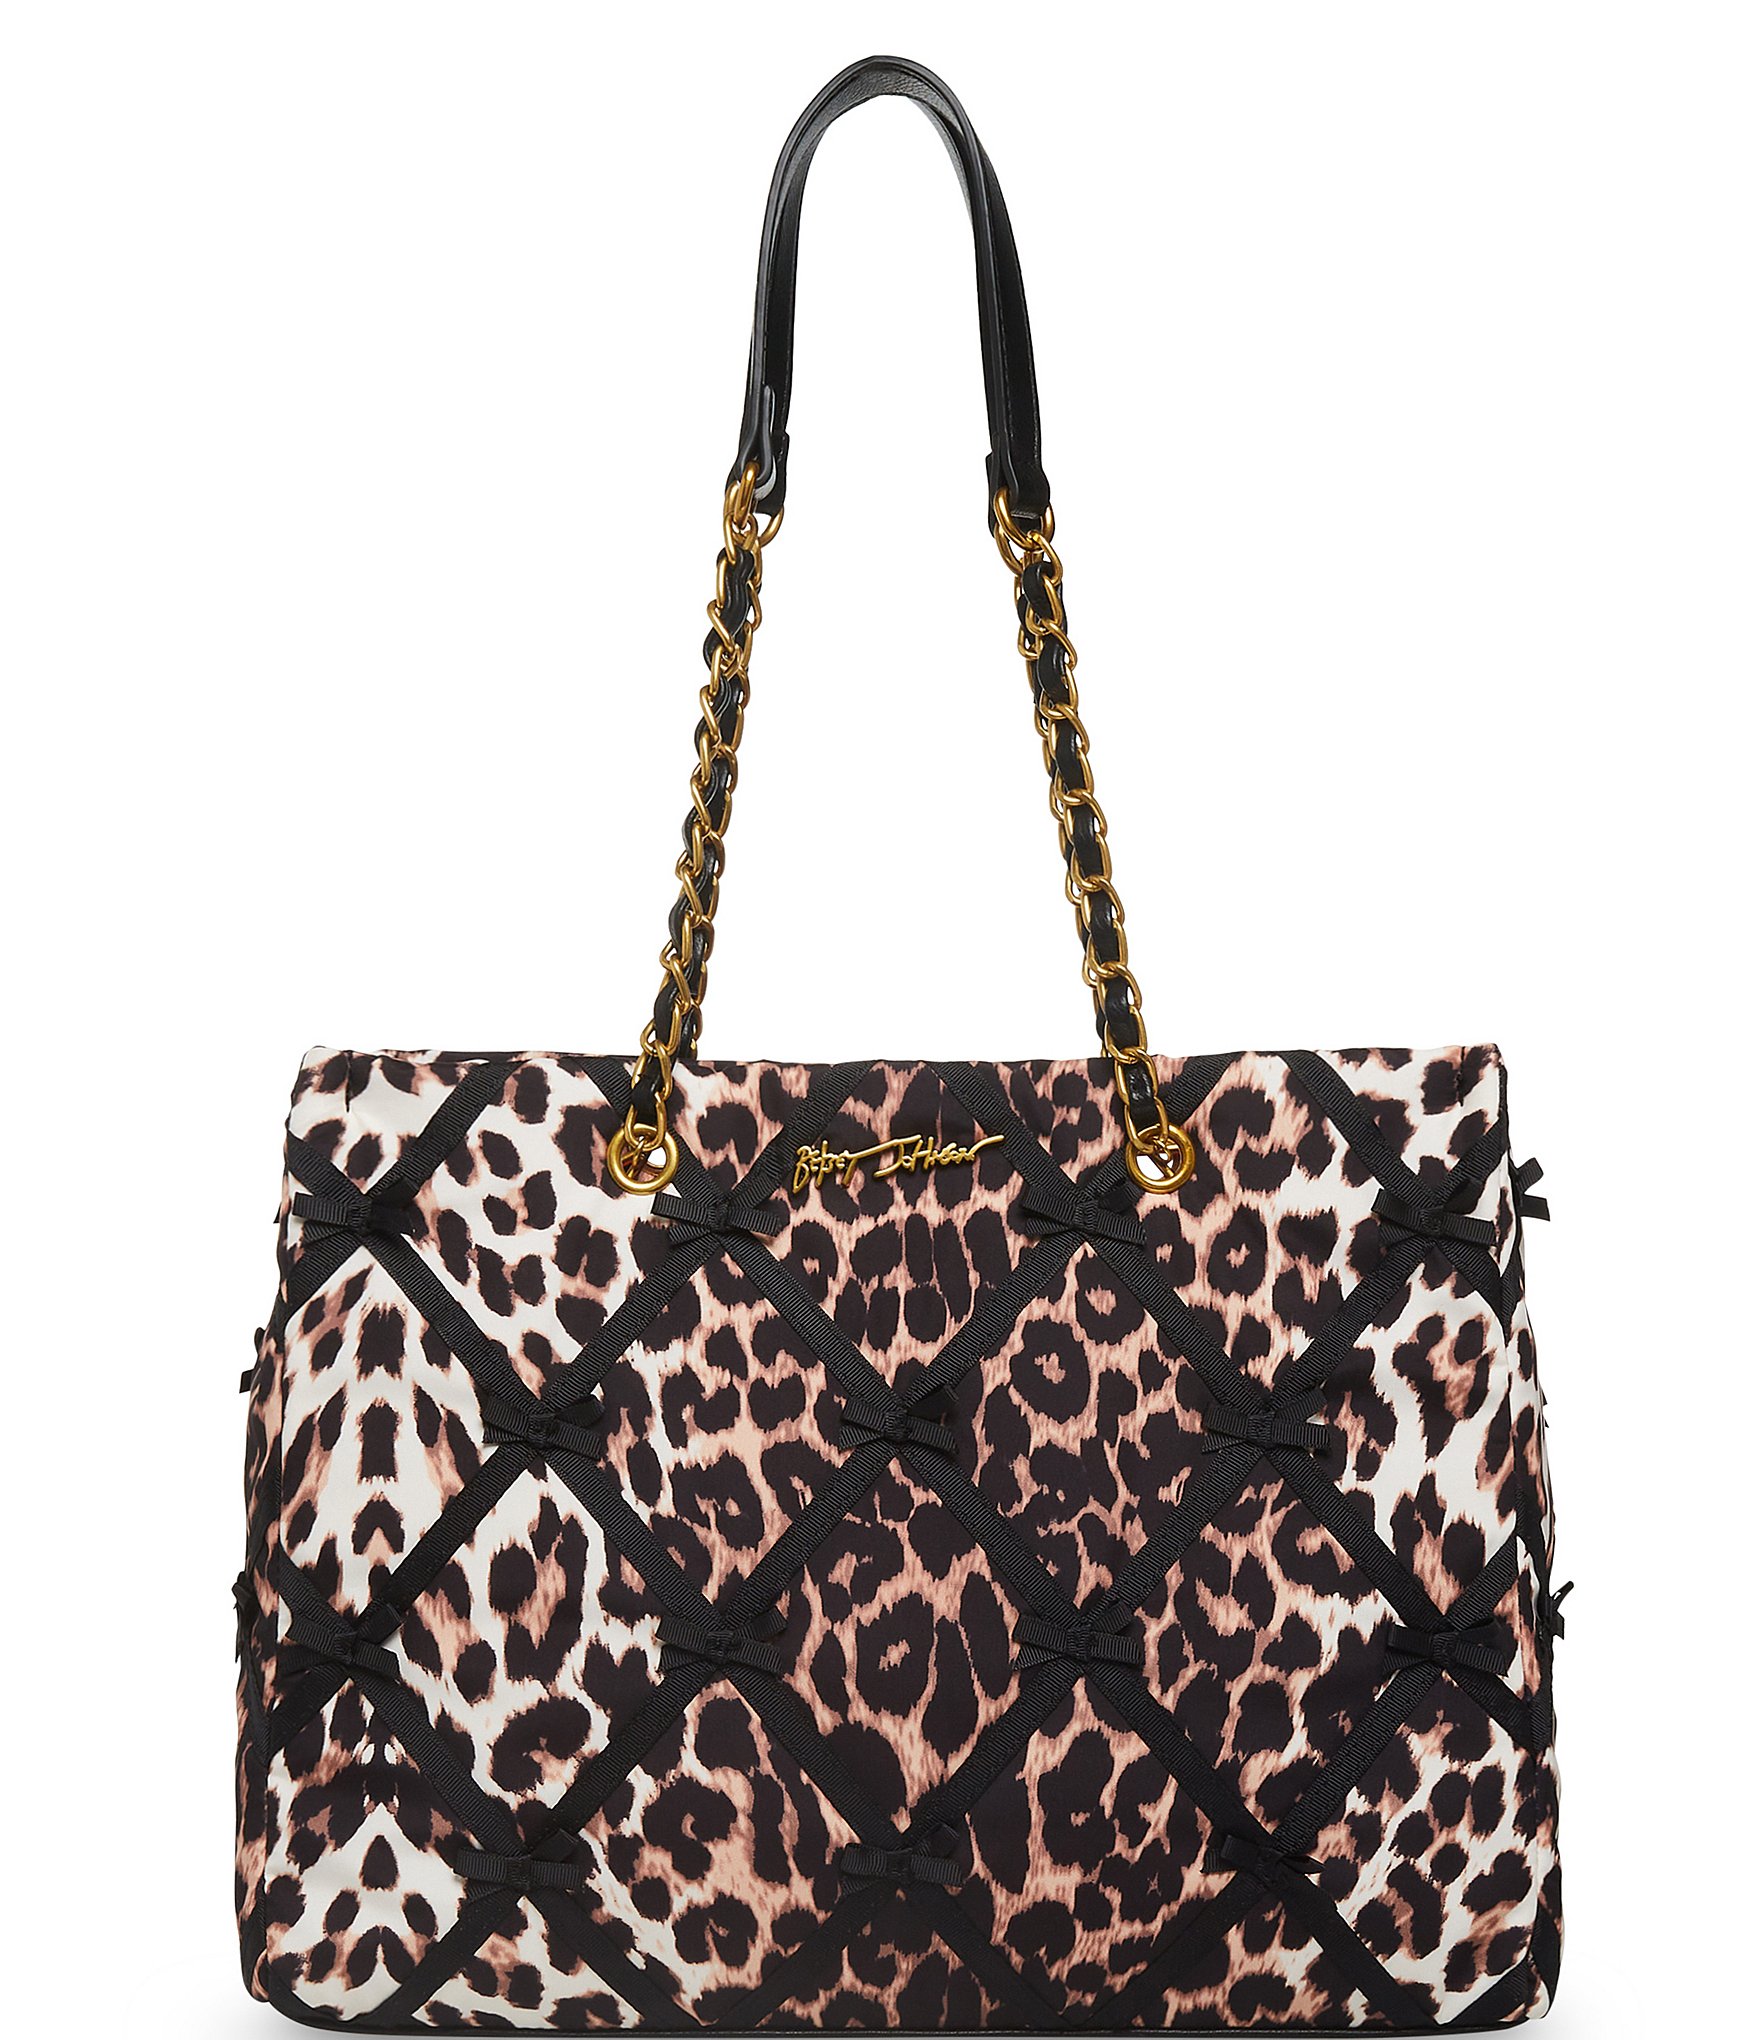 Share 87+ betsey johnson tote bags best - in.cdgdbentre